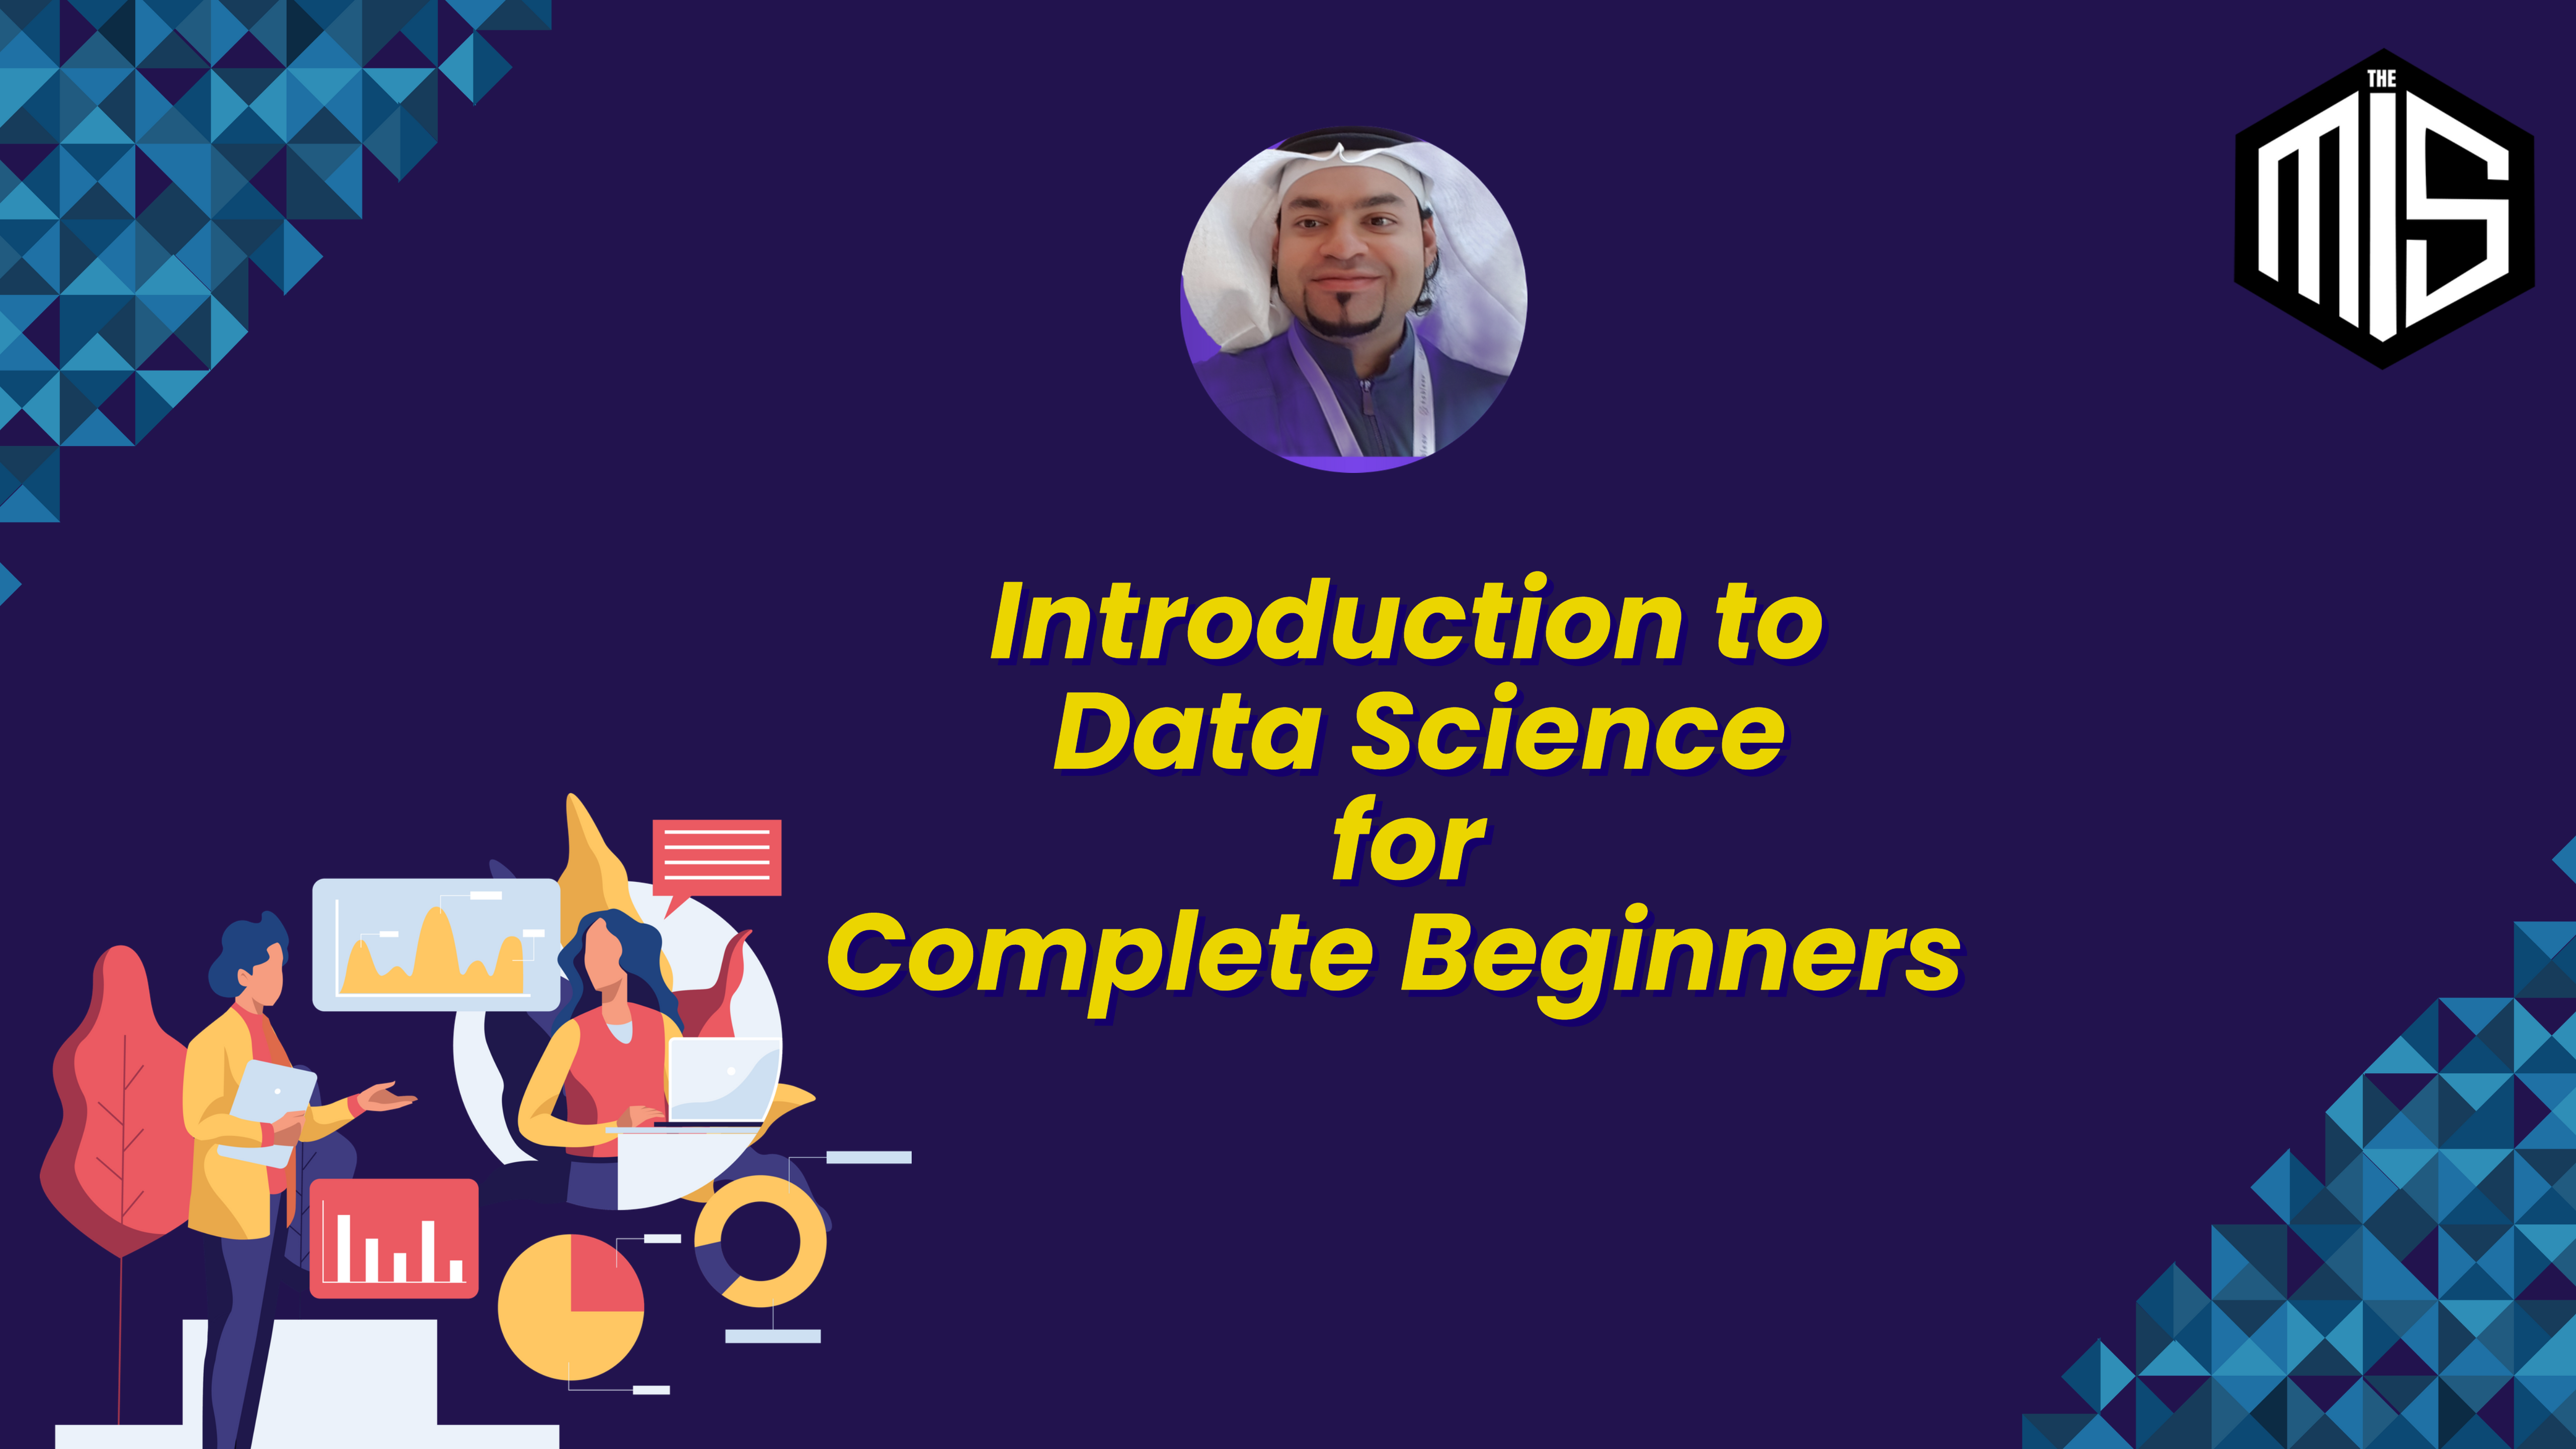 Introduction to Data Science for Complete Beginners